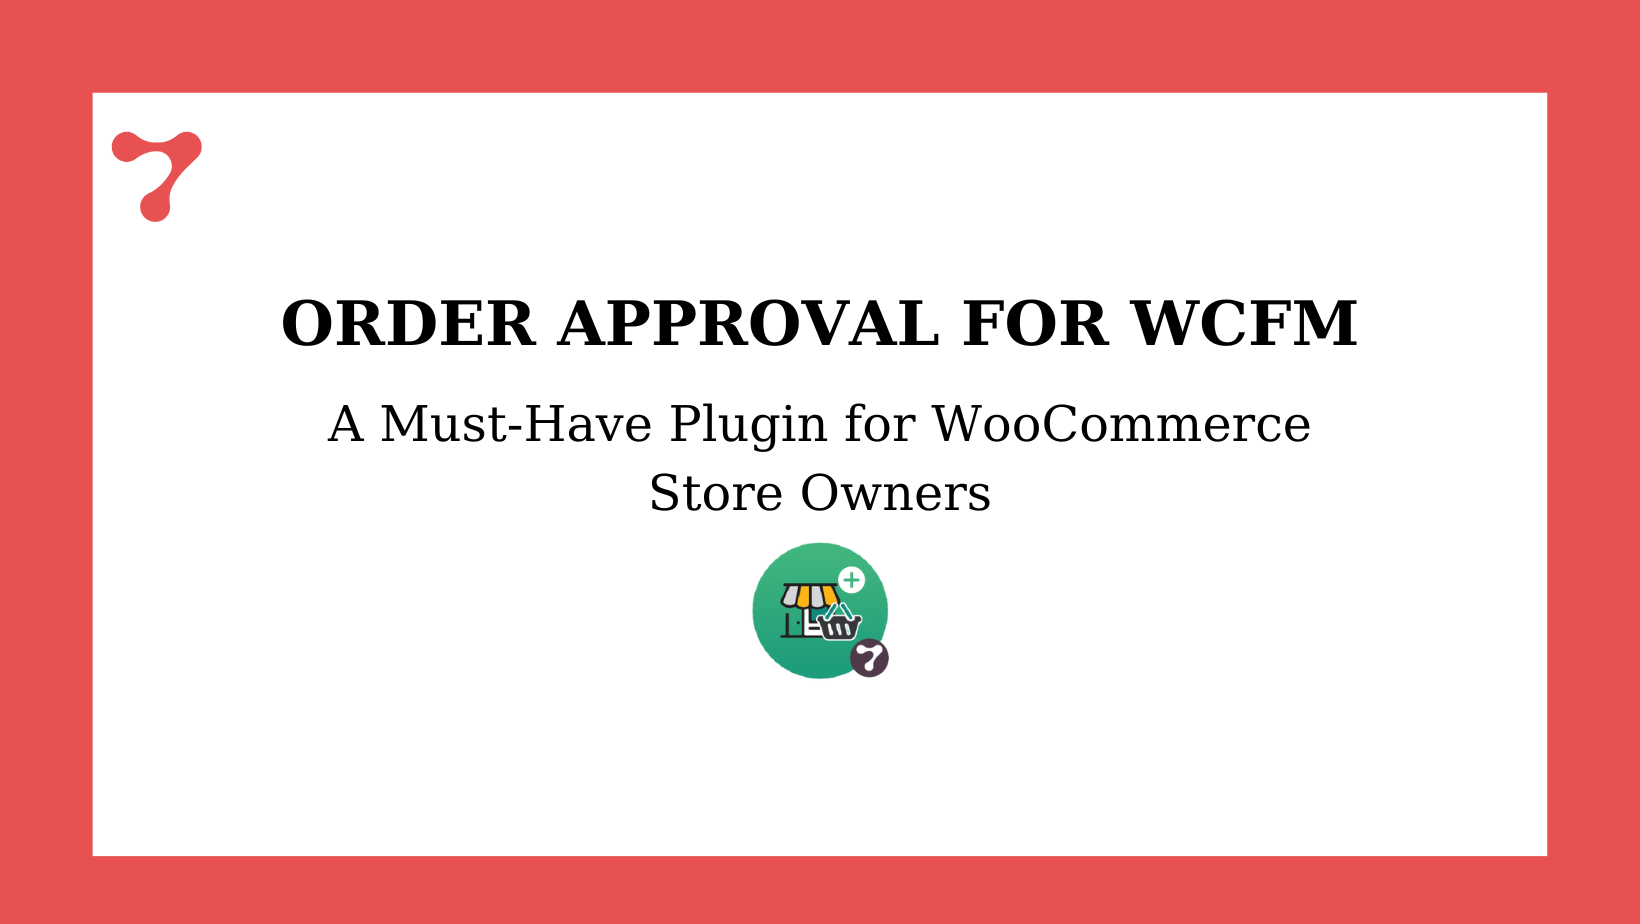 Order Approval for WCFM Plugin: A Must-Have Plugin for WooCommerce Store Owners